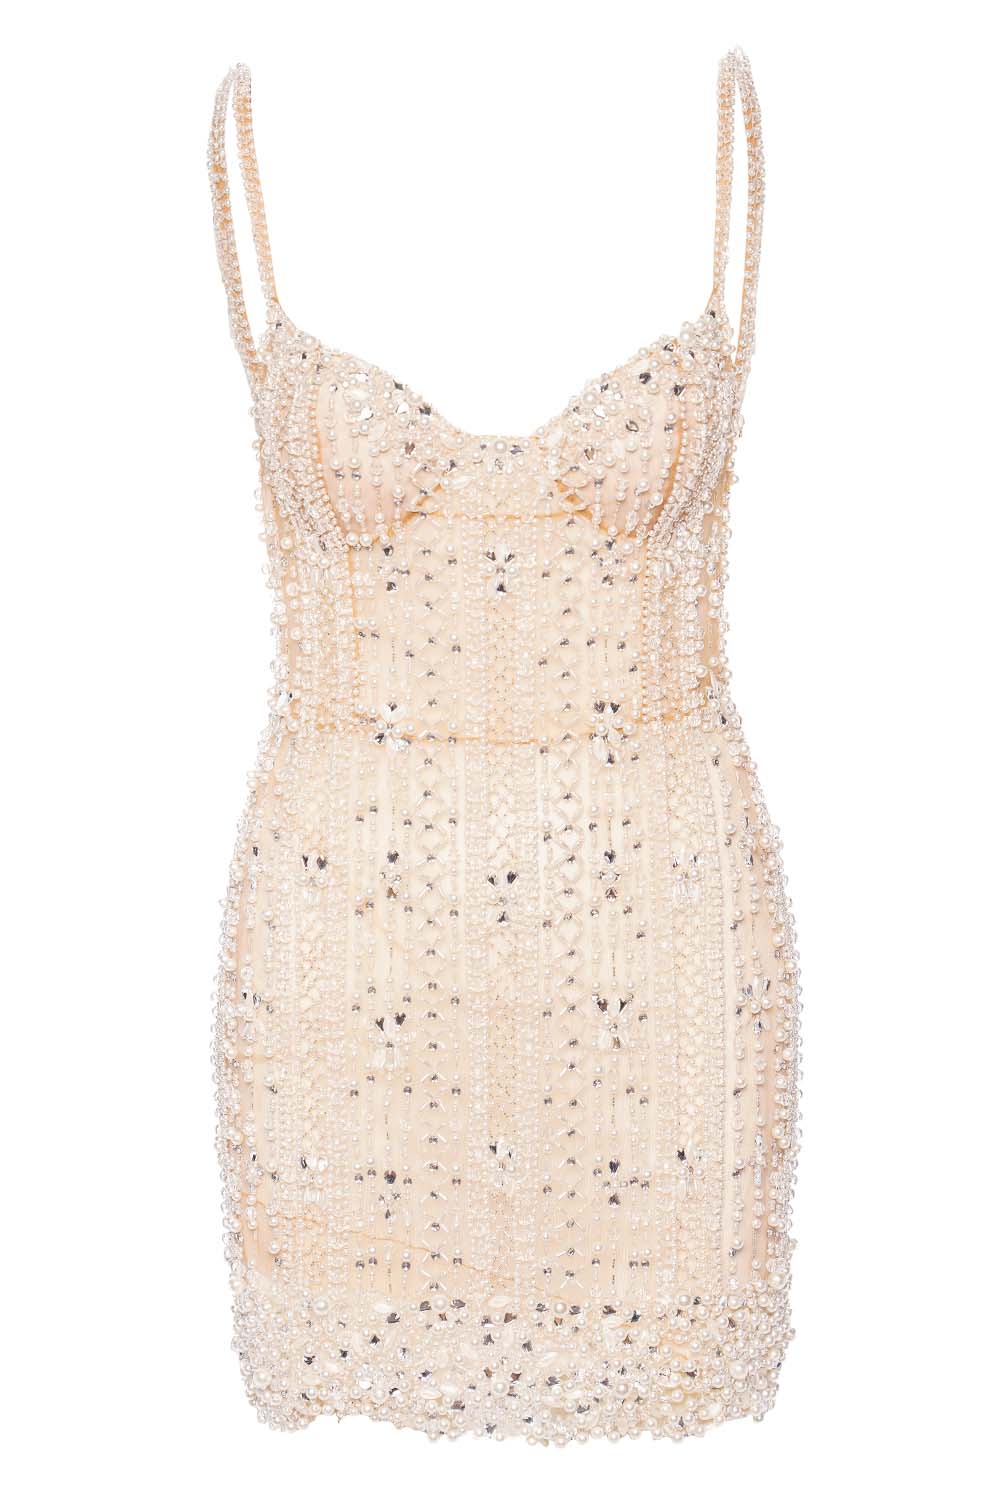 PatBO Ivory Pearl Beaded Cocktail Dress